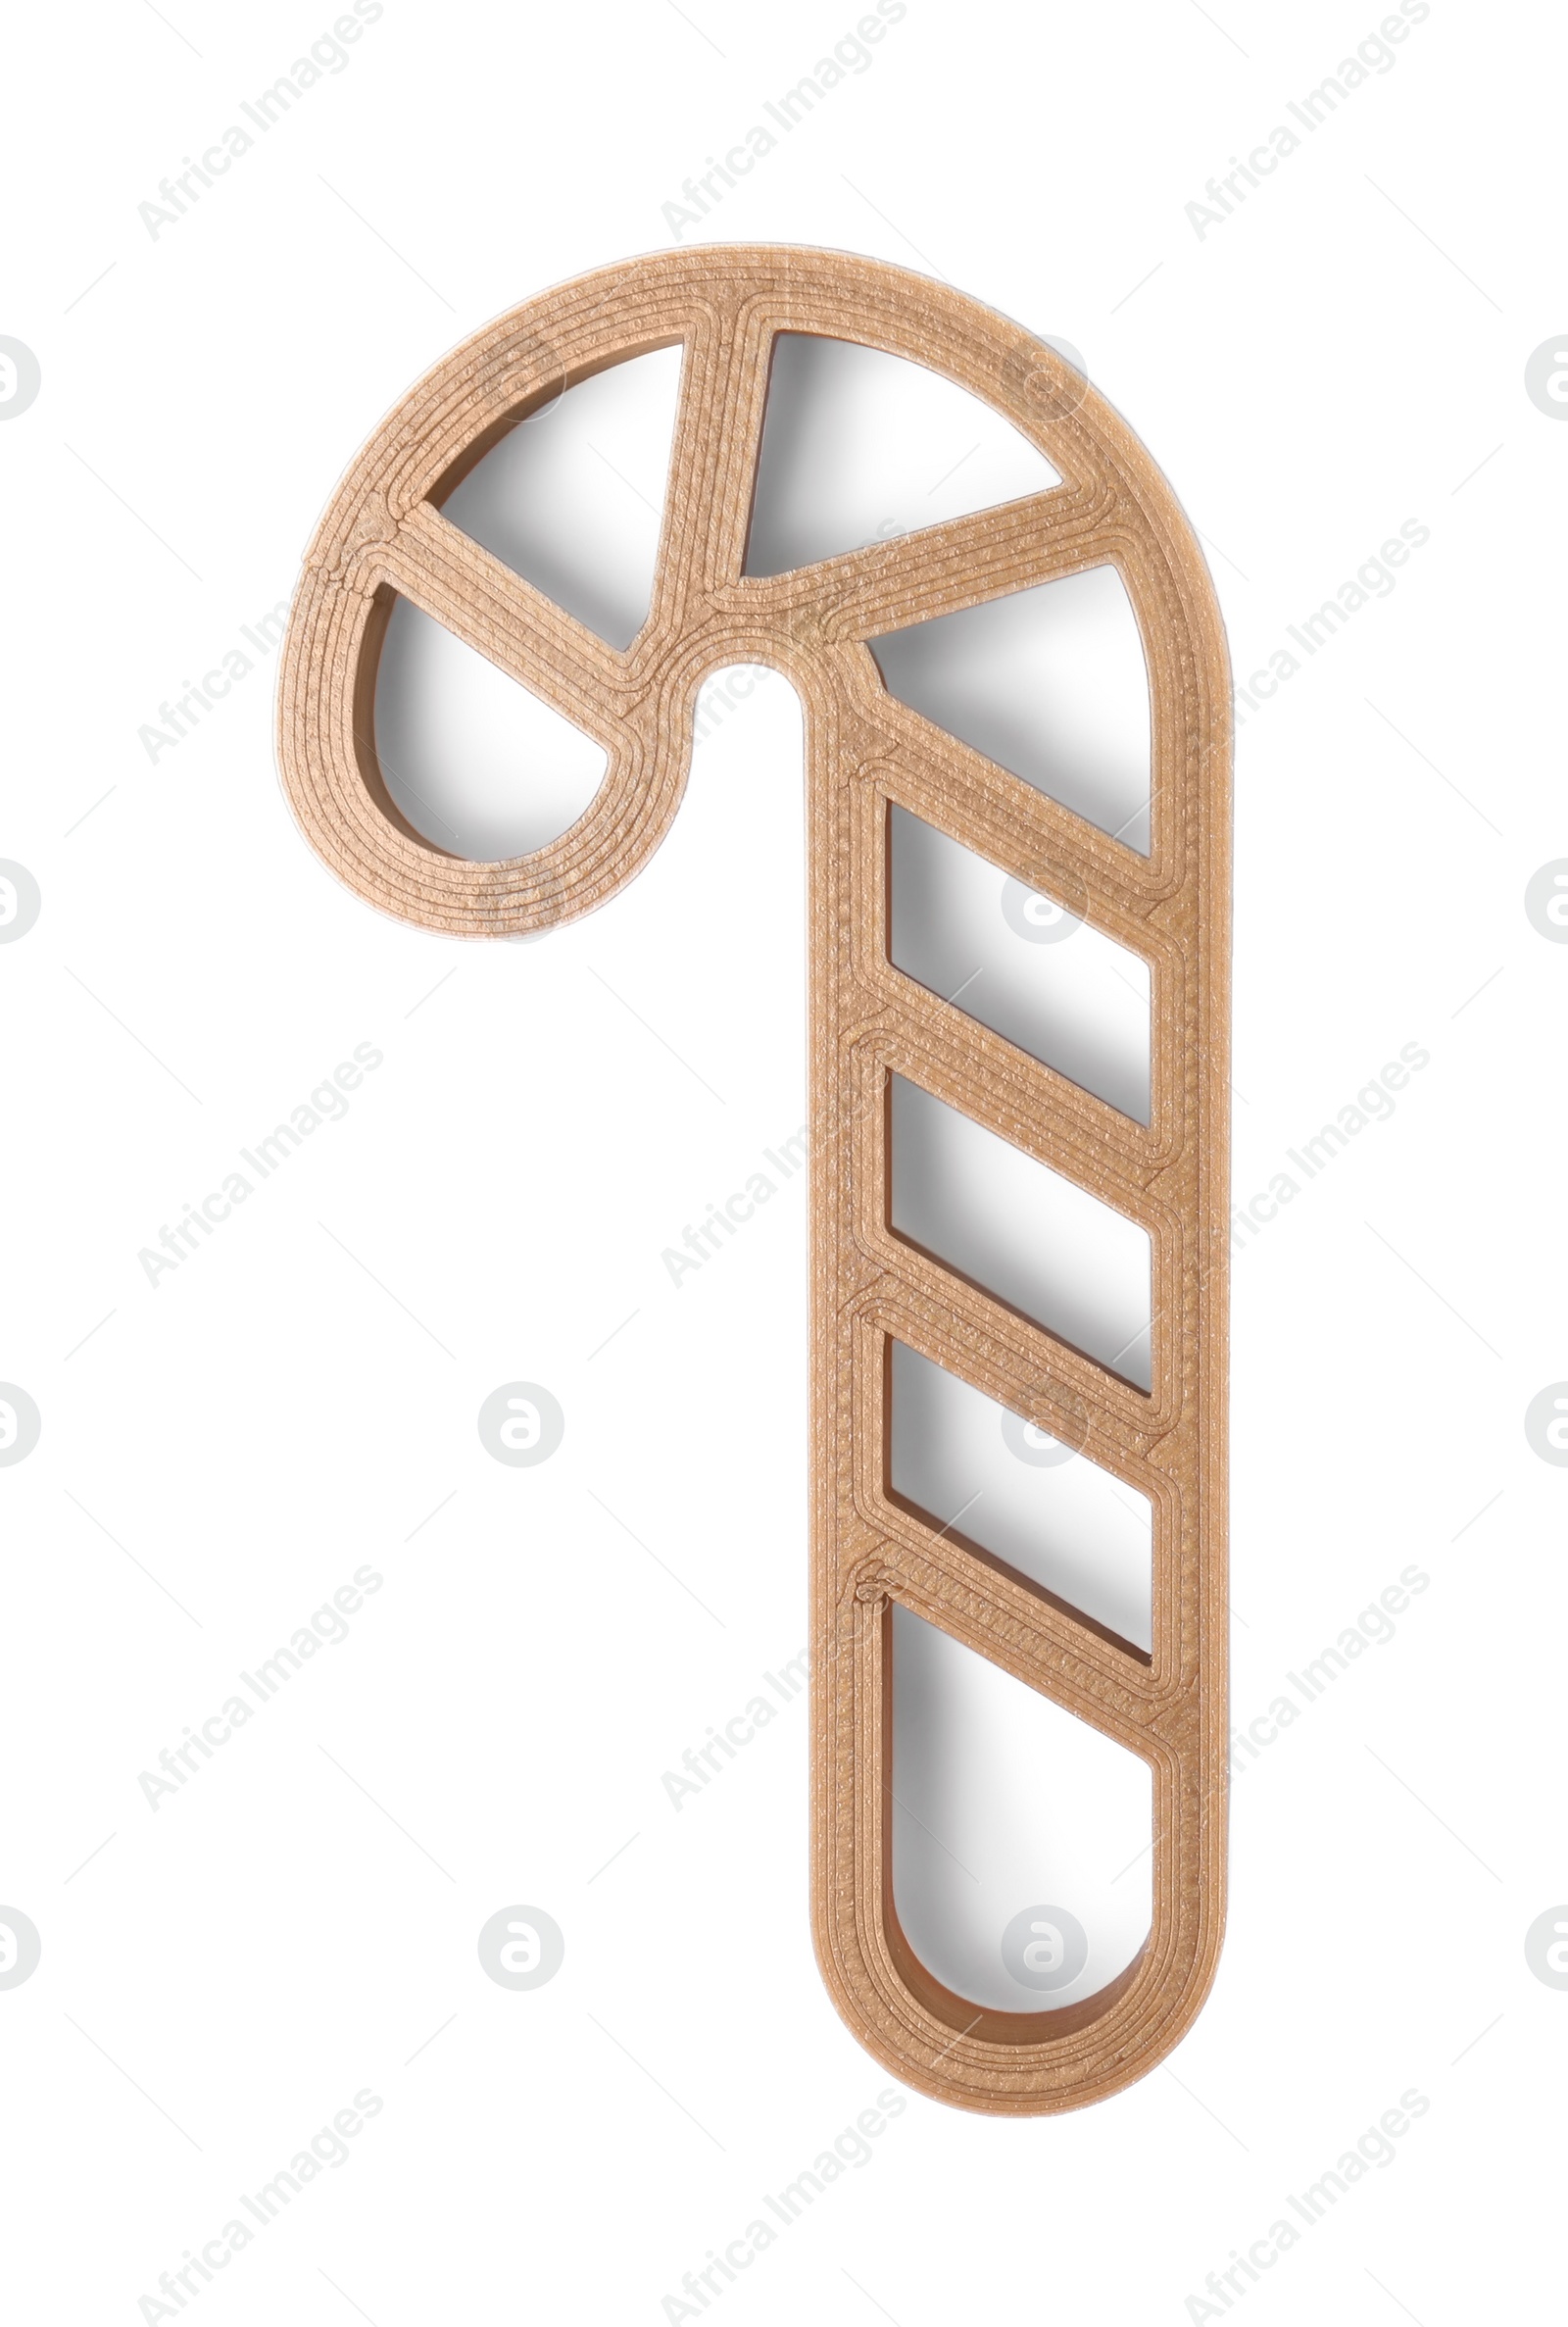 Photo of Cookie cutter in shape of candy cane isolated on white, top view